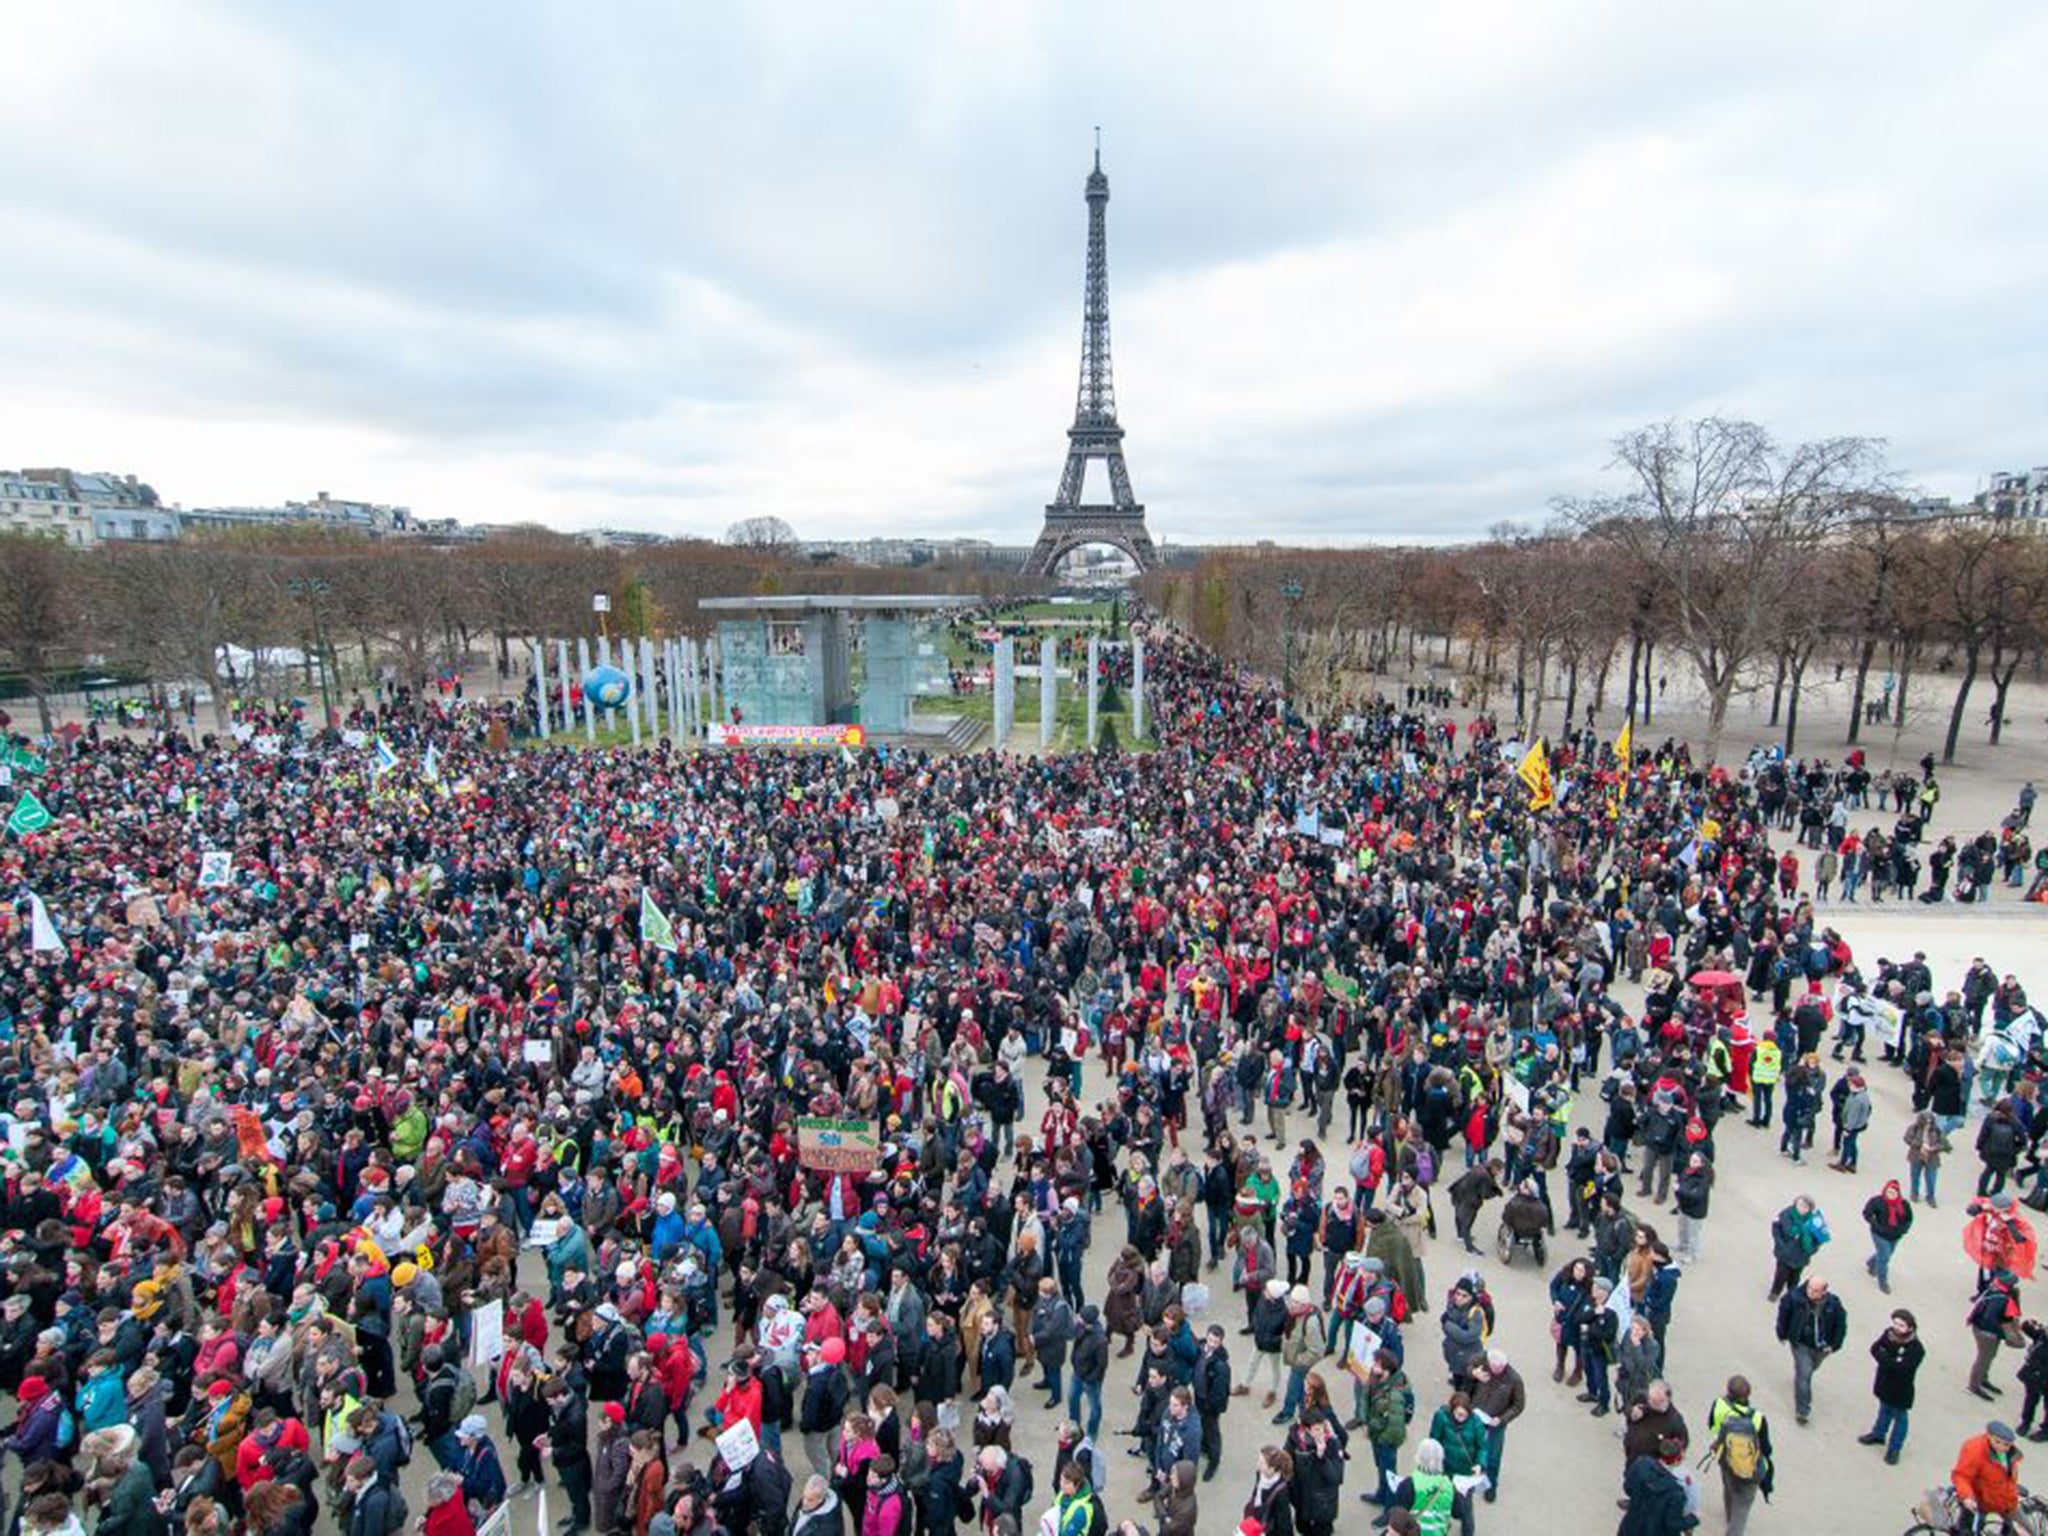 Thousands gather on Champ de Mars near the Eiffel tower for a human chain as COP 21 negotiations come to an end